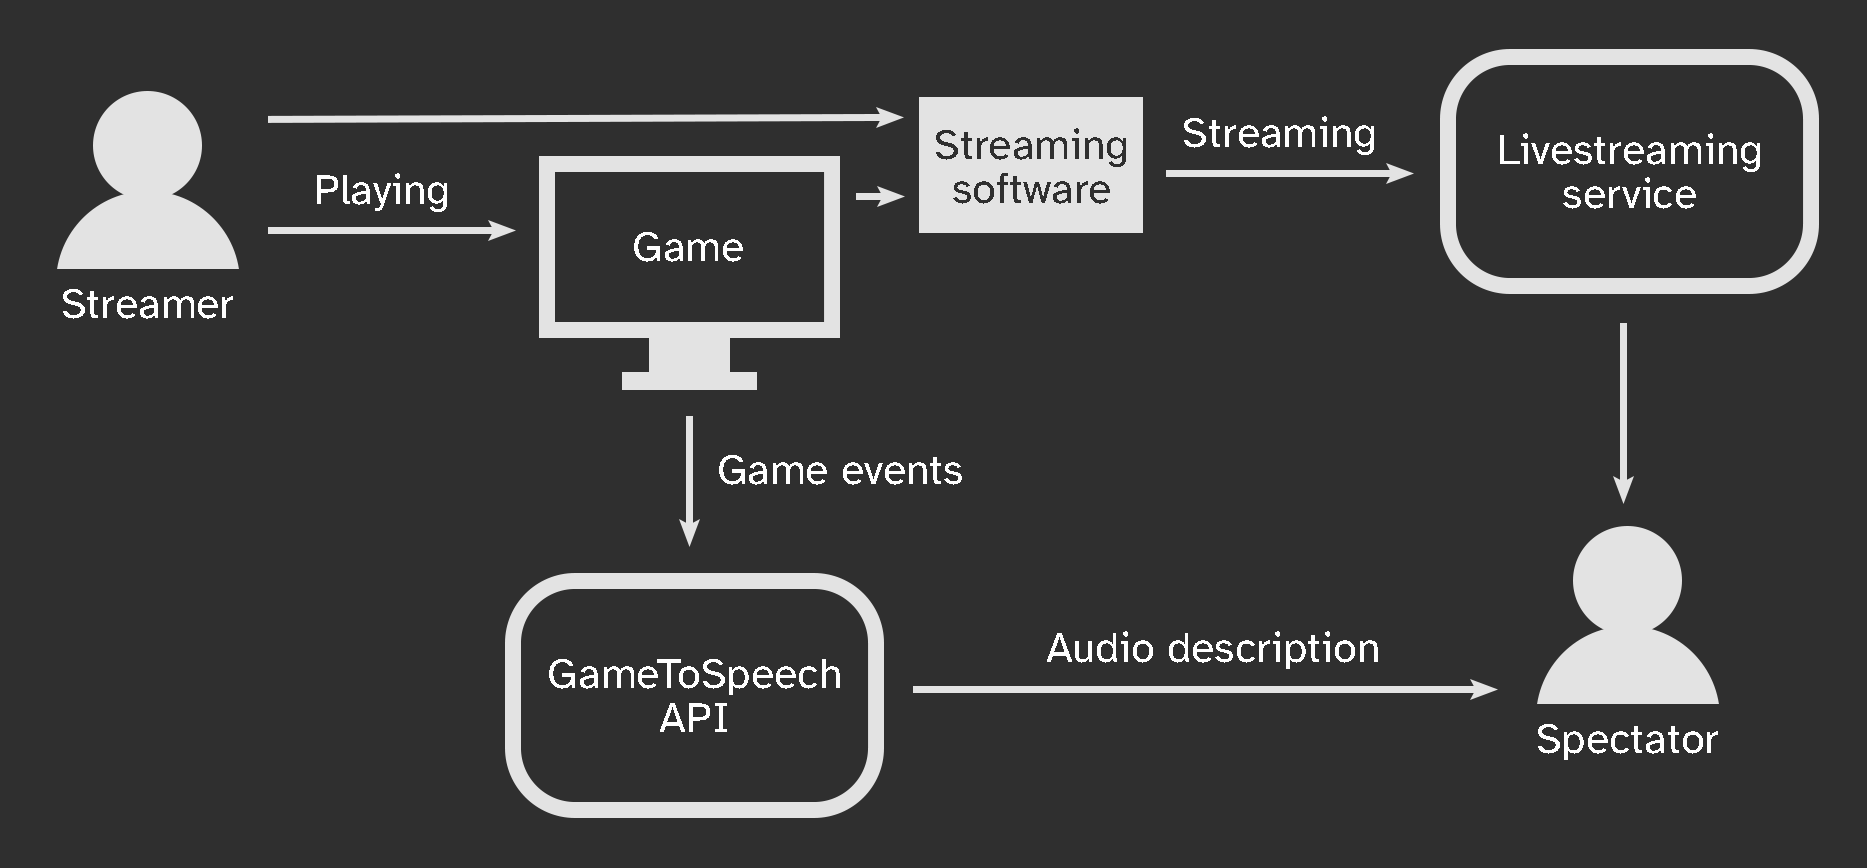 Schema of a possible solution and its implementaion. On the left, we can find a streamer who is playing a game that is streamed to a live streaming service thanks to a streaming software. The live streaming is then delivered to spectators. I am proposing to add another service which will get game events and output audio description to spectators.